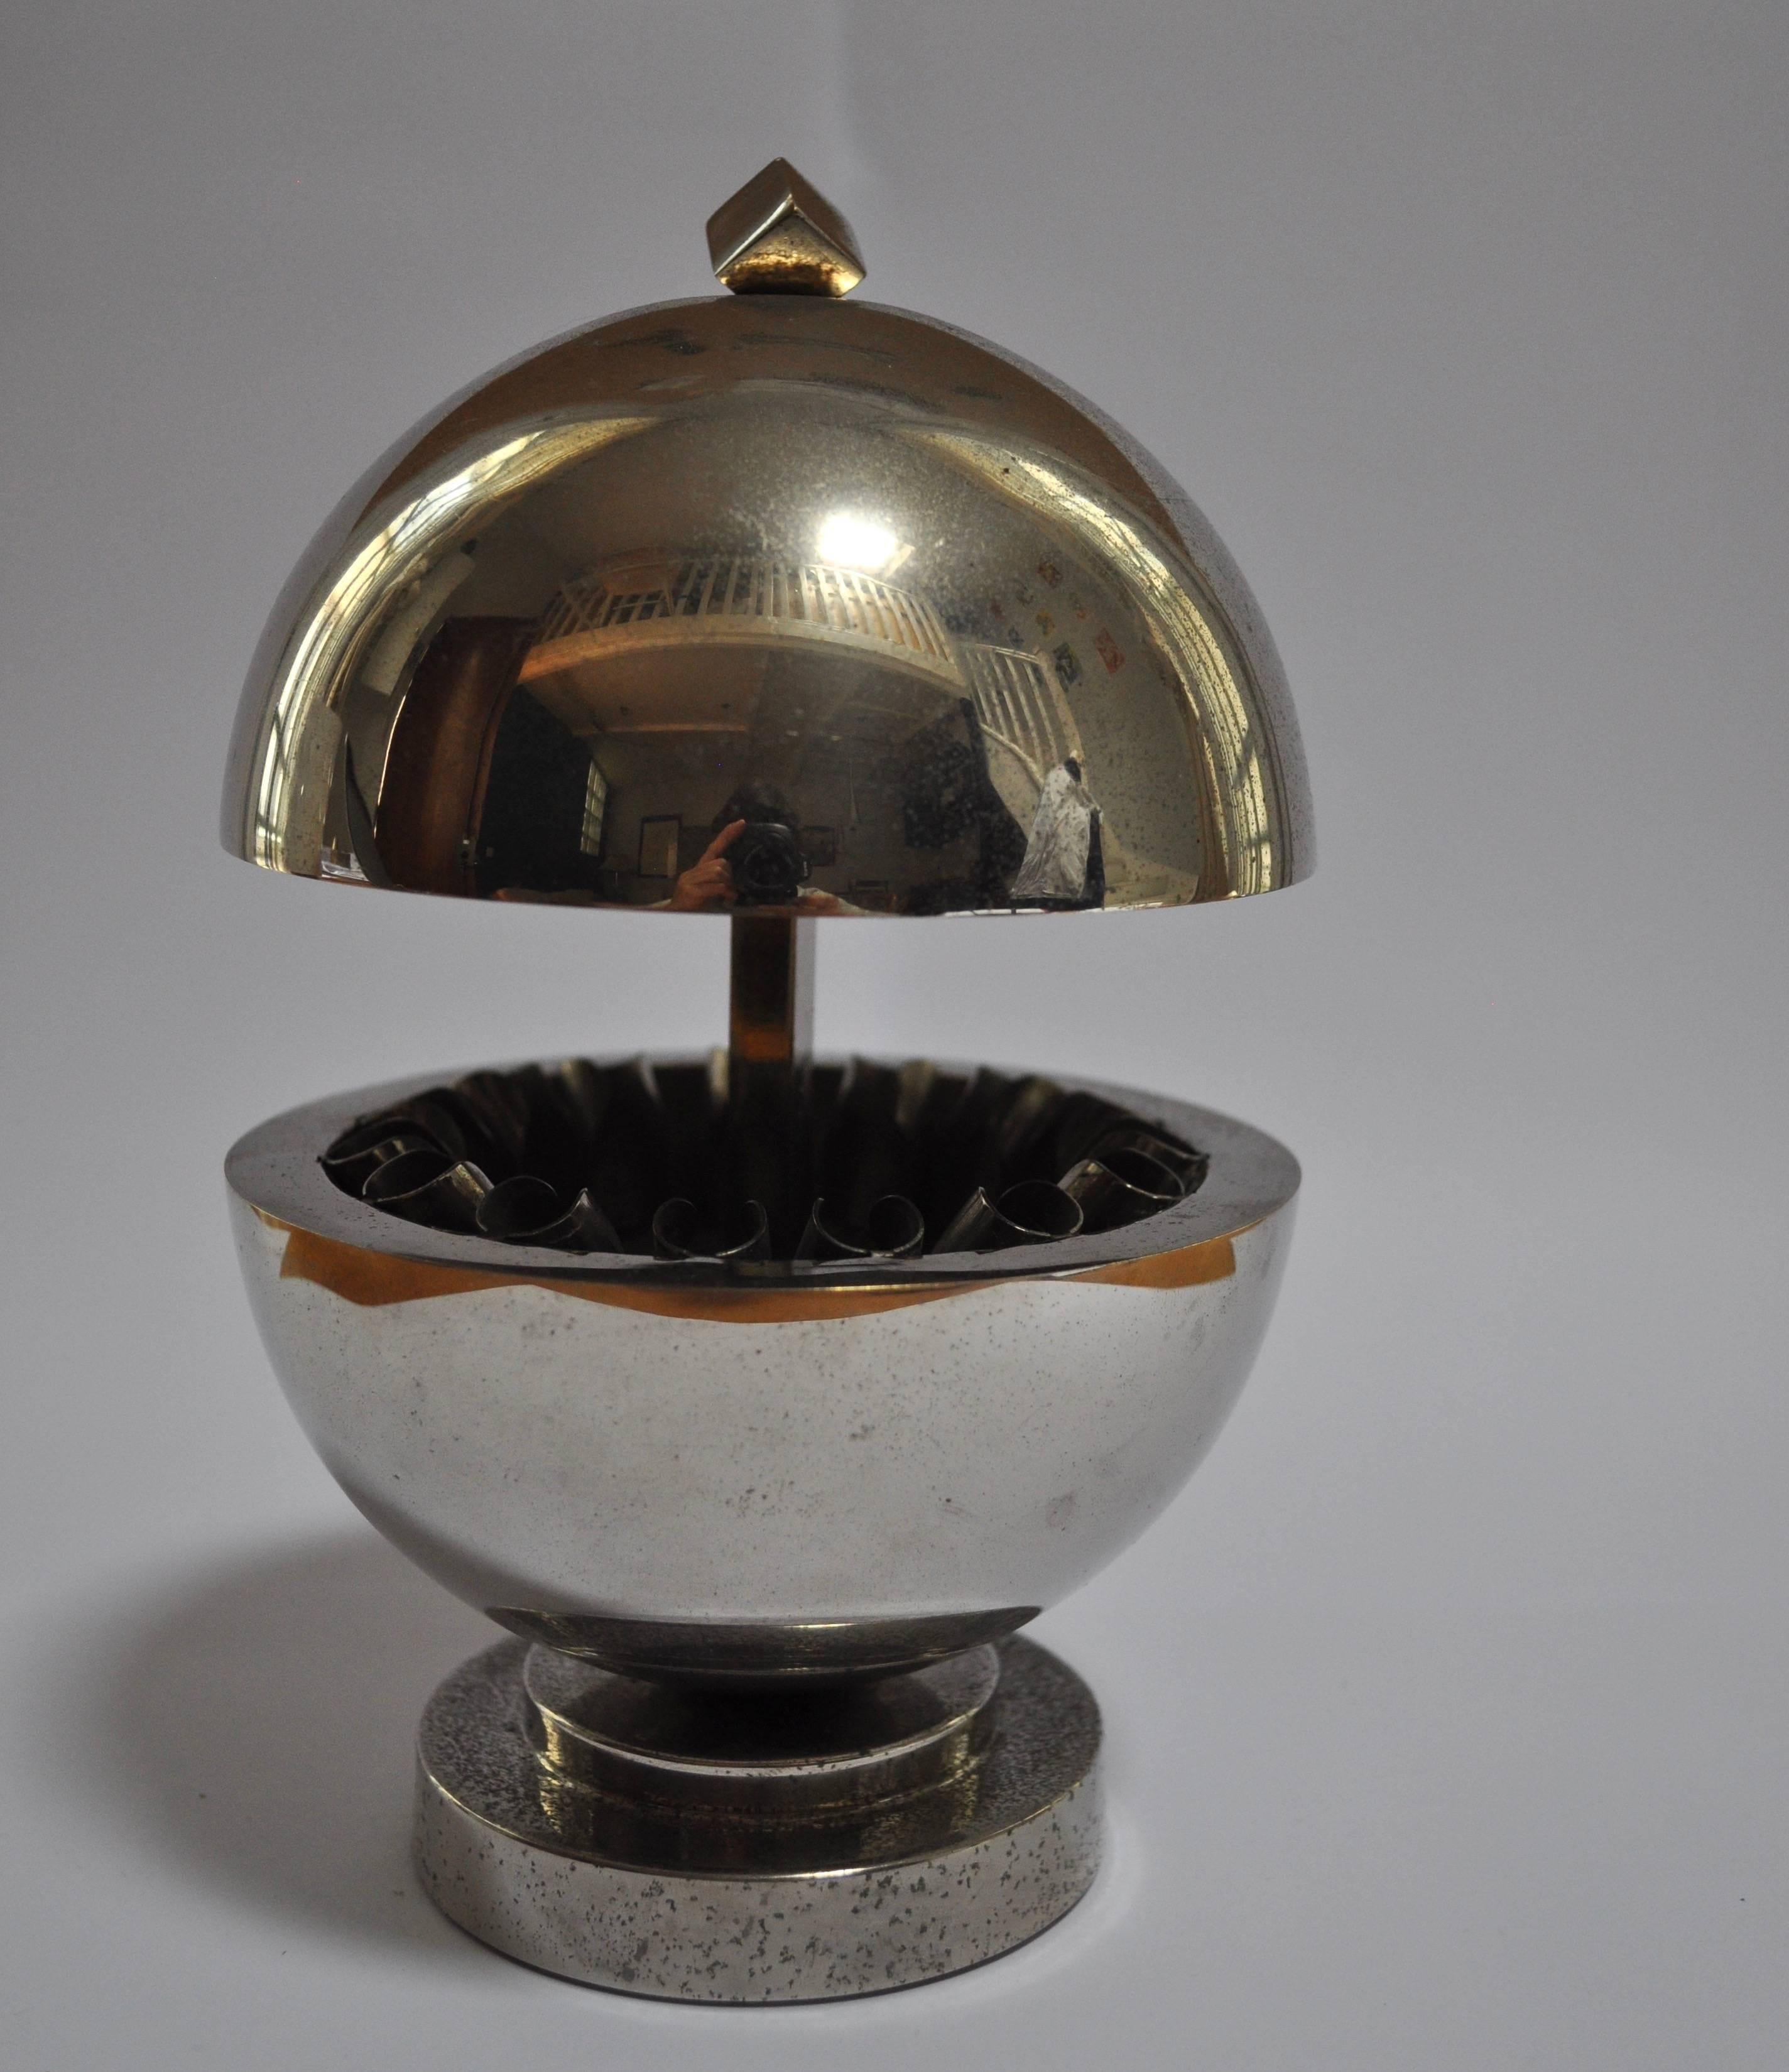 Nickel plated ball shaped cigarettes holder. 

Stamped at the bottom: Raymond Mauny, France, Paris
He was a creator of parisian maison Desny.
Excellent example of French modernist design.